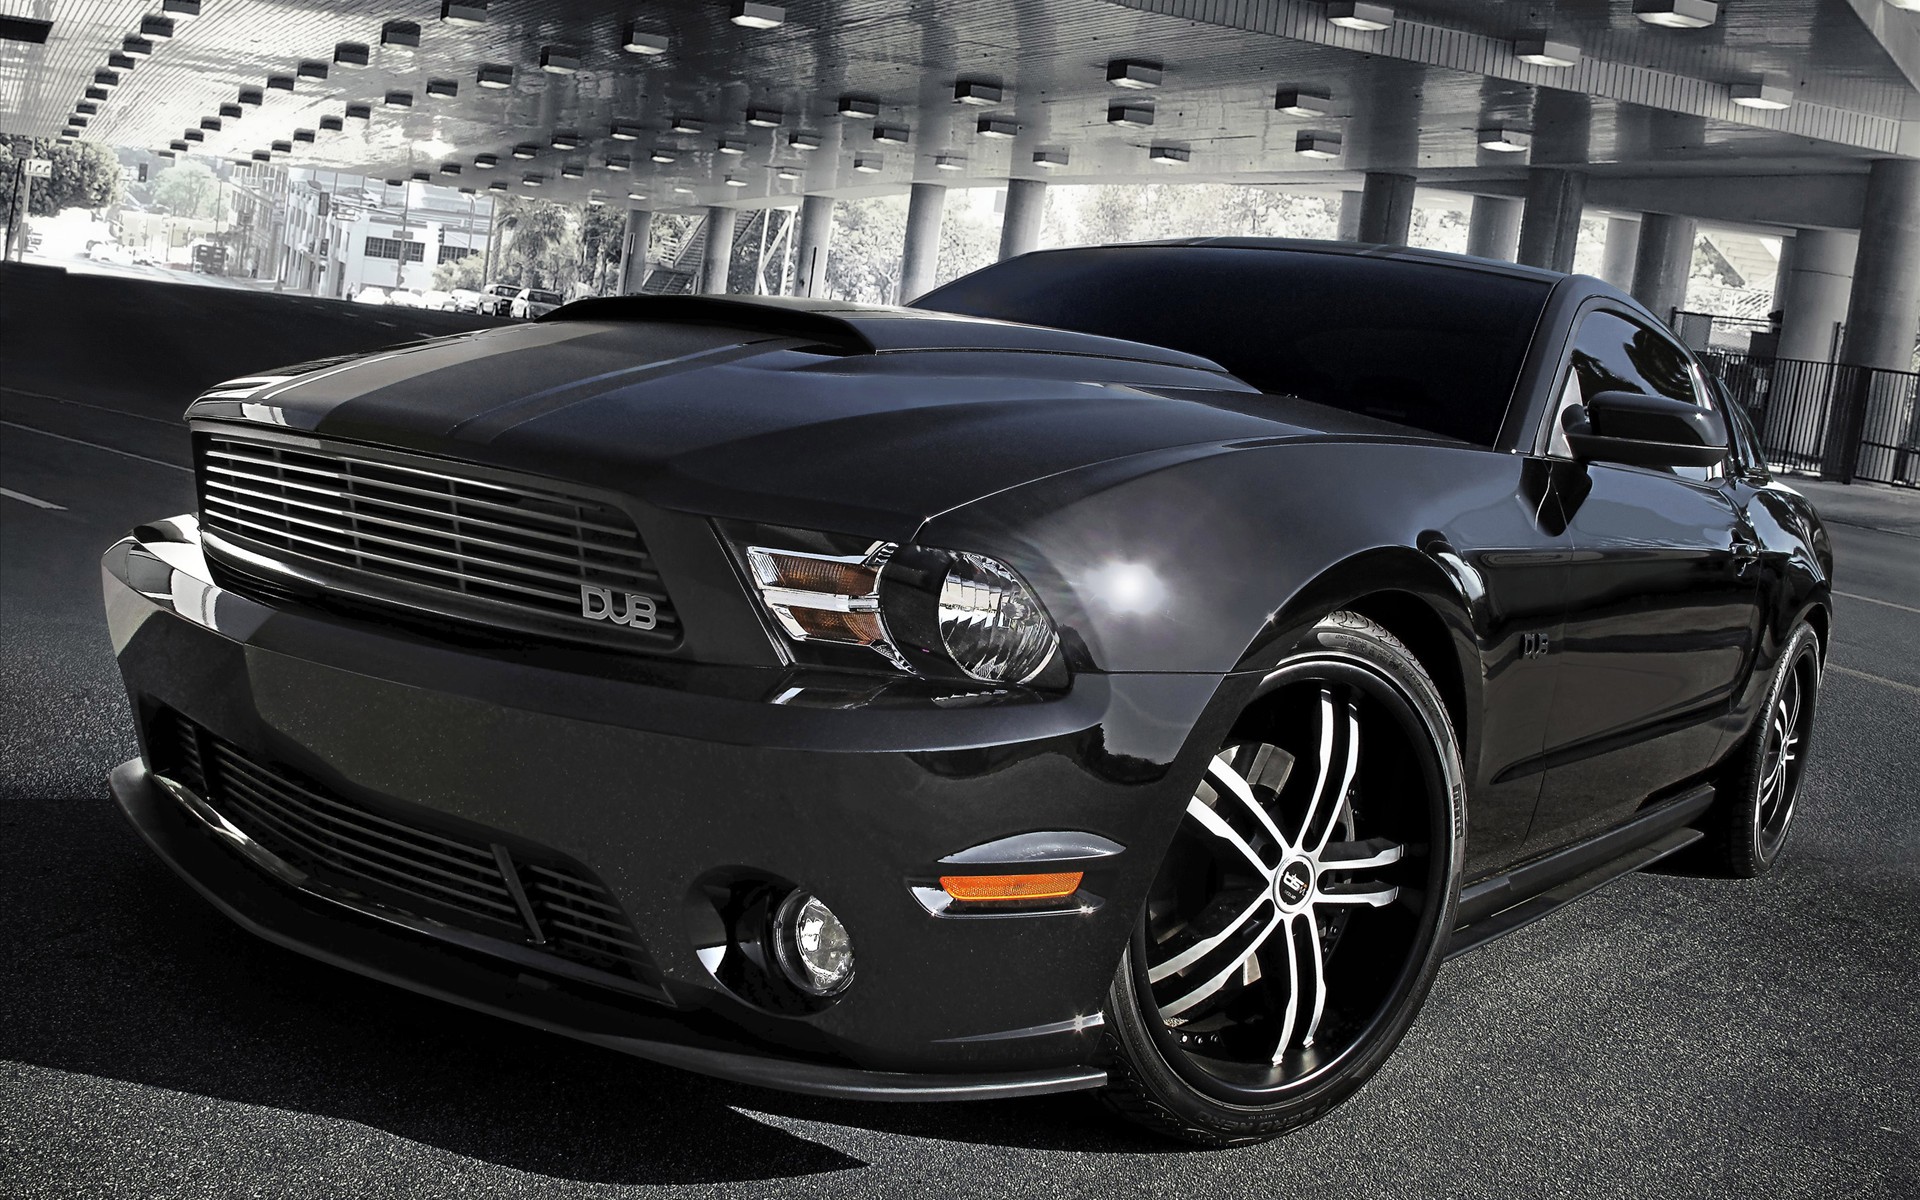 Ford Mustang Dub Edition Exclusive HD Wallpaper